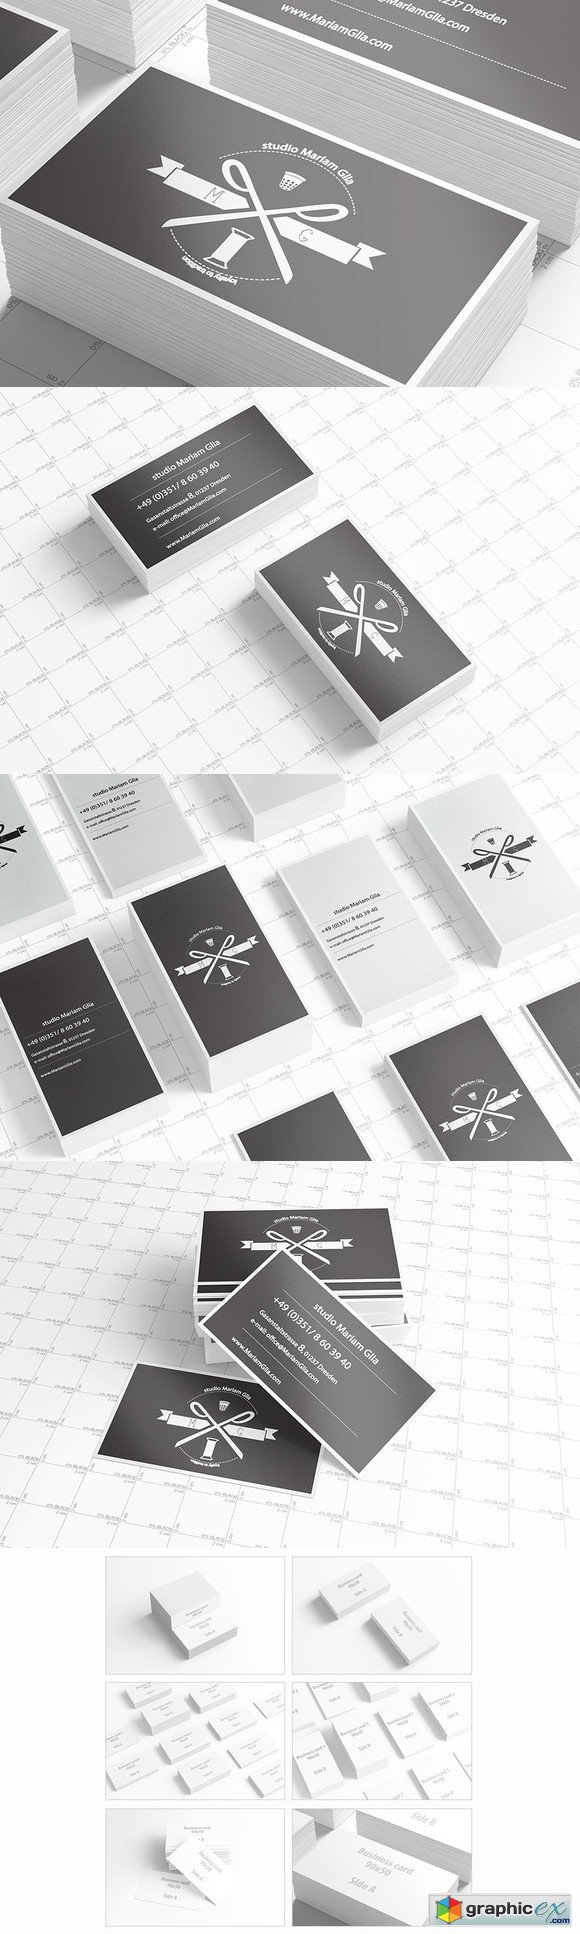 Business Cards Mock up (90x50)